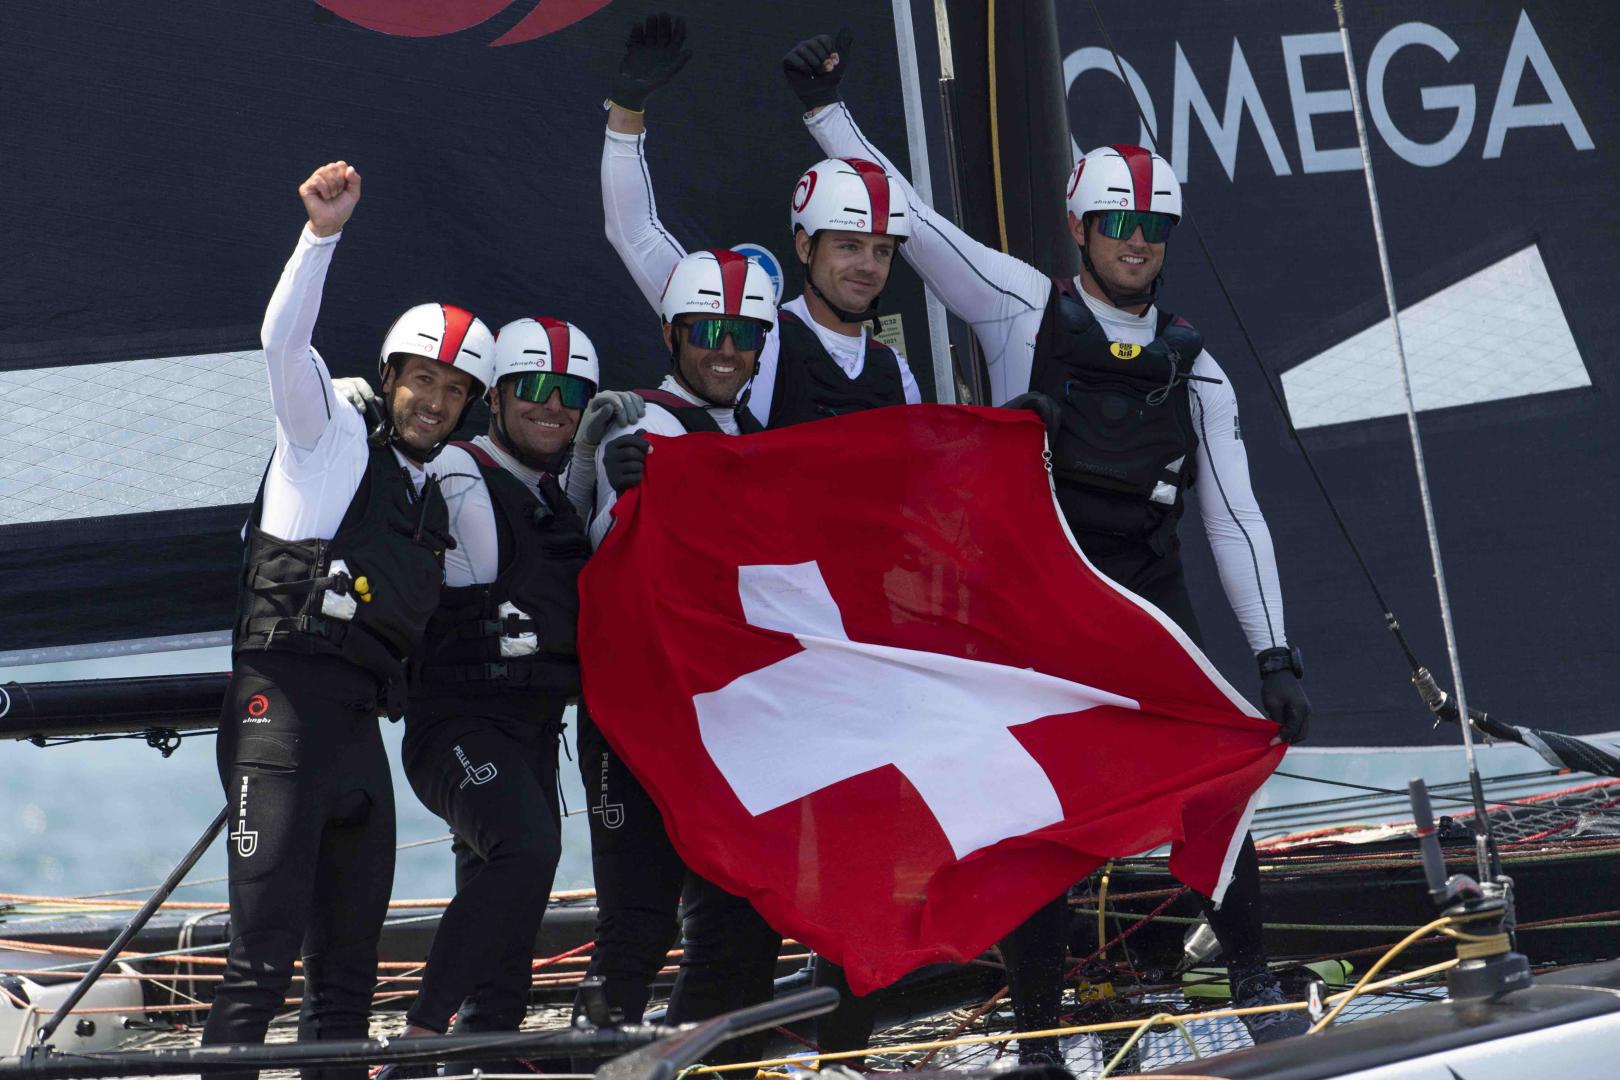 Ernesto Bertarelli's Alinghi team win its third GC32 Racing Tour event in a row, but this time it was close